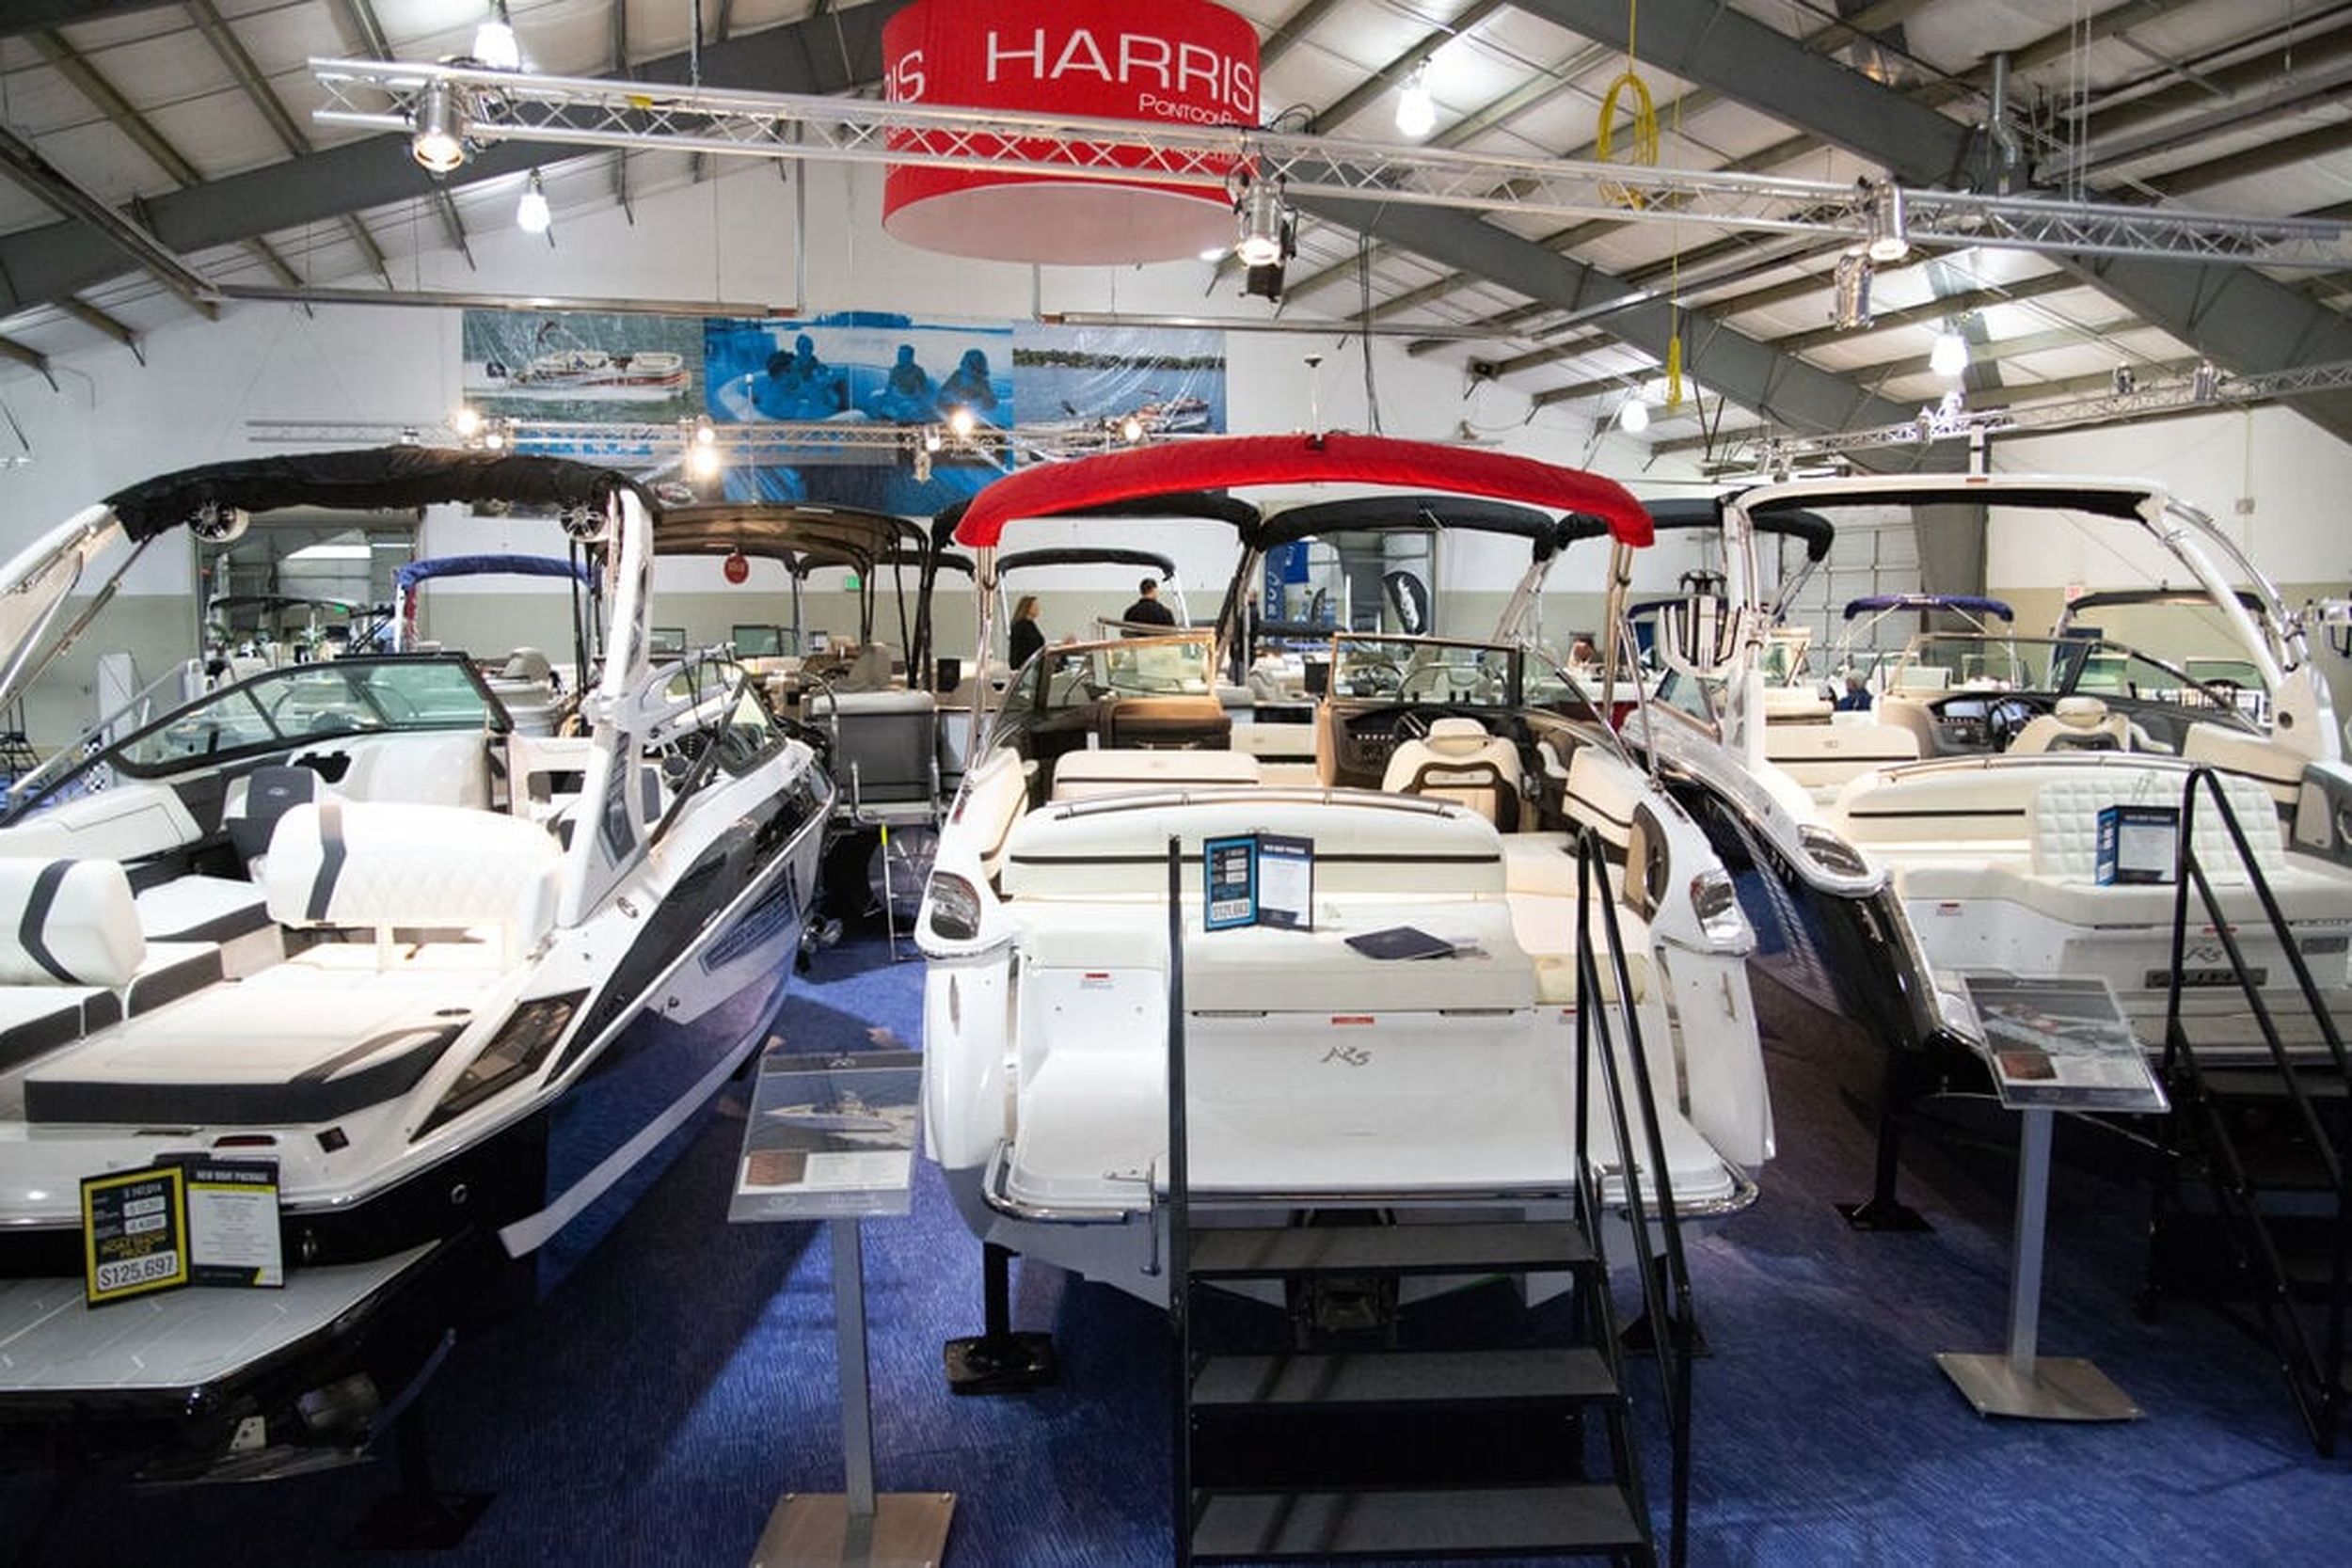 Spokane Boat Show returns this week after two year hiatus The